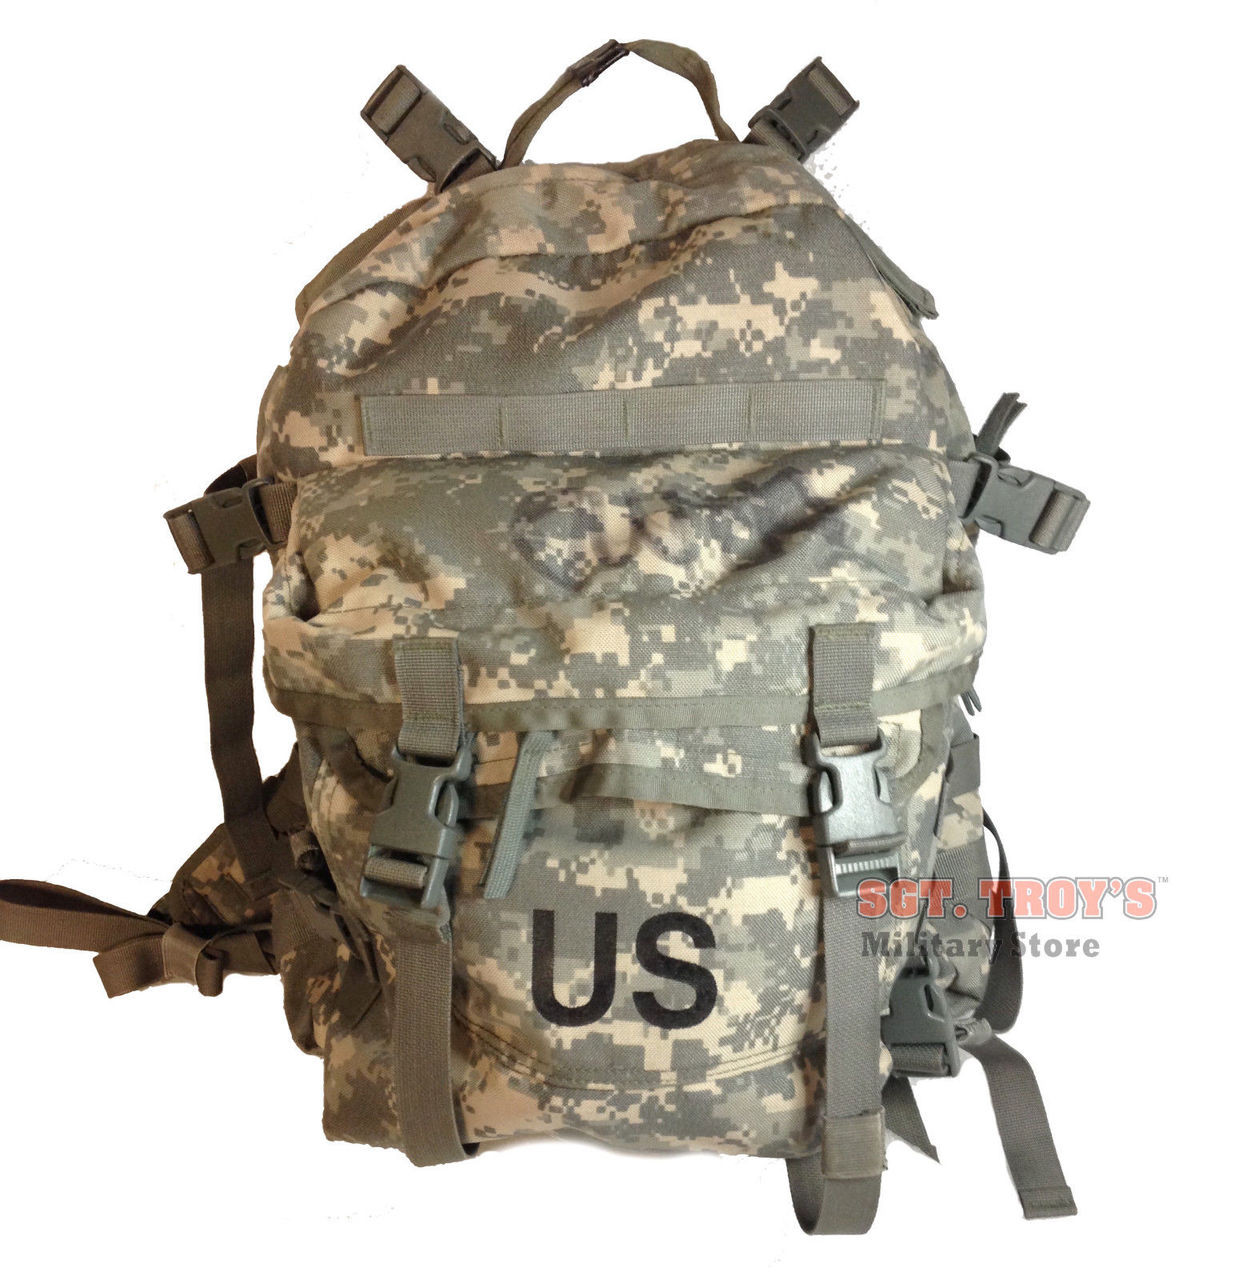 US ARMY ACU ASSAULT PACK 3 DAY MOLLE II BACKPACK BUG OUT BAG Very Good ...